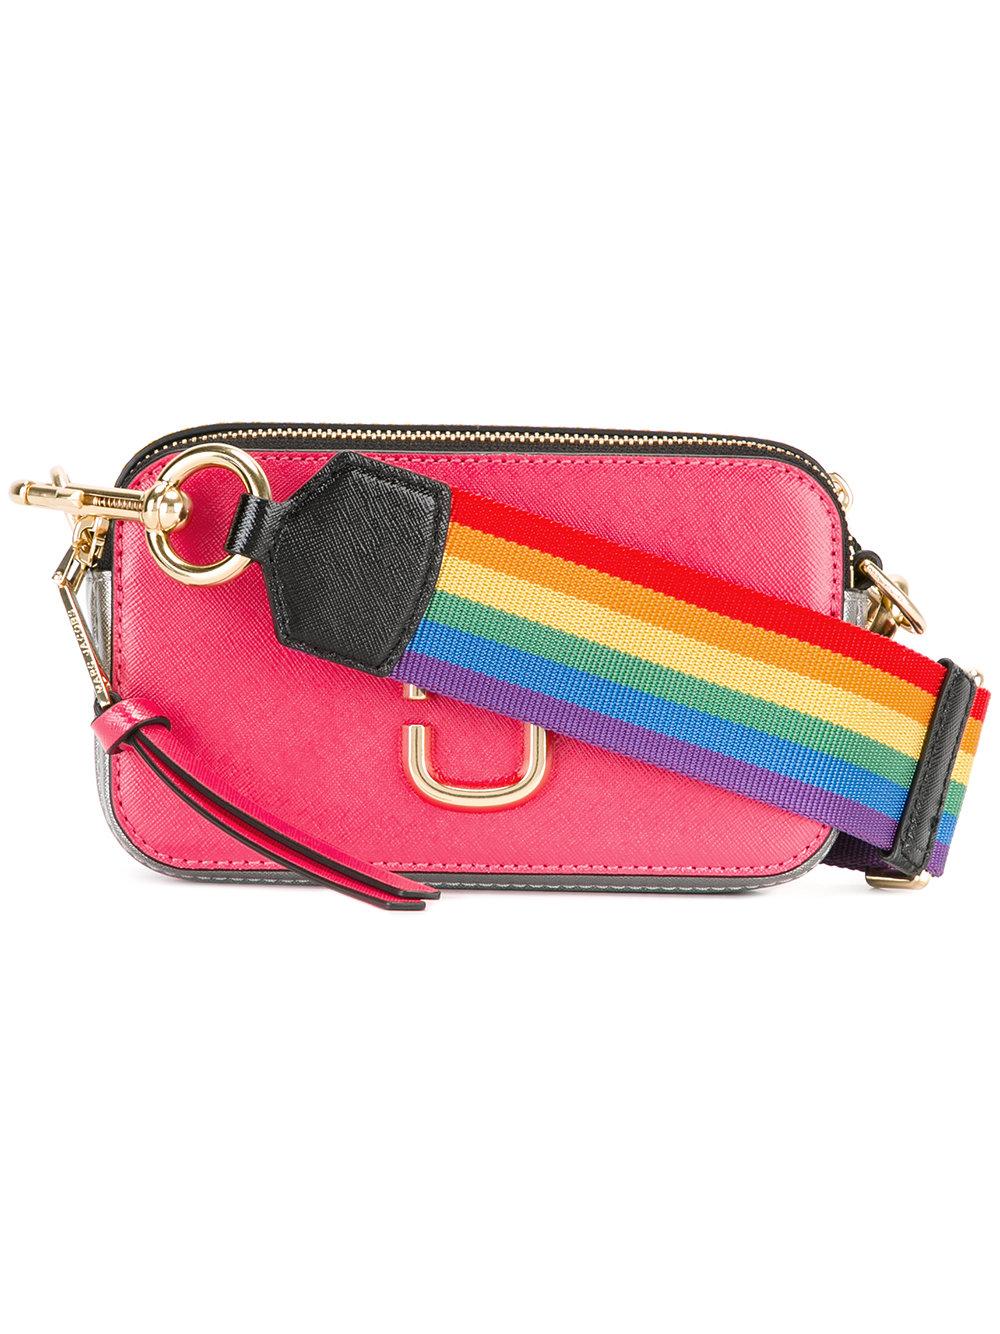 Lyst - Marc jacobs Rainbow Strap Shoulder Bag in Pink